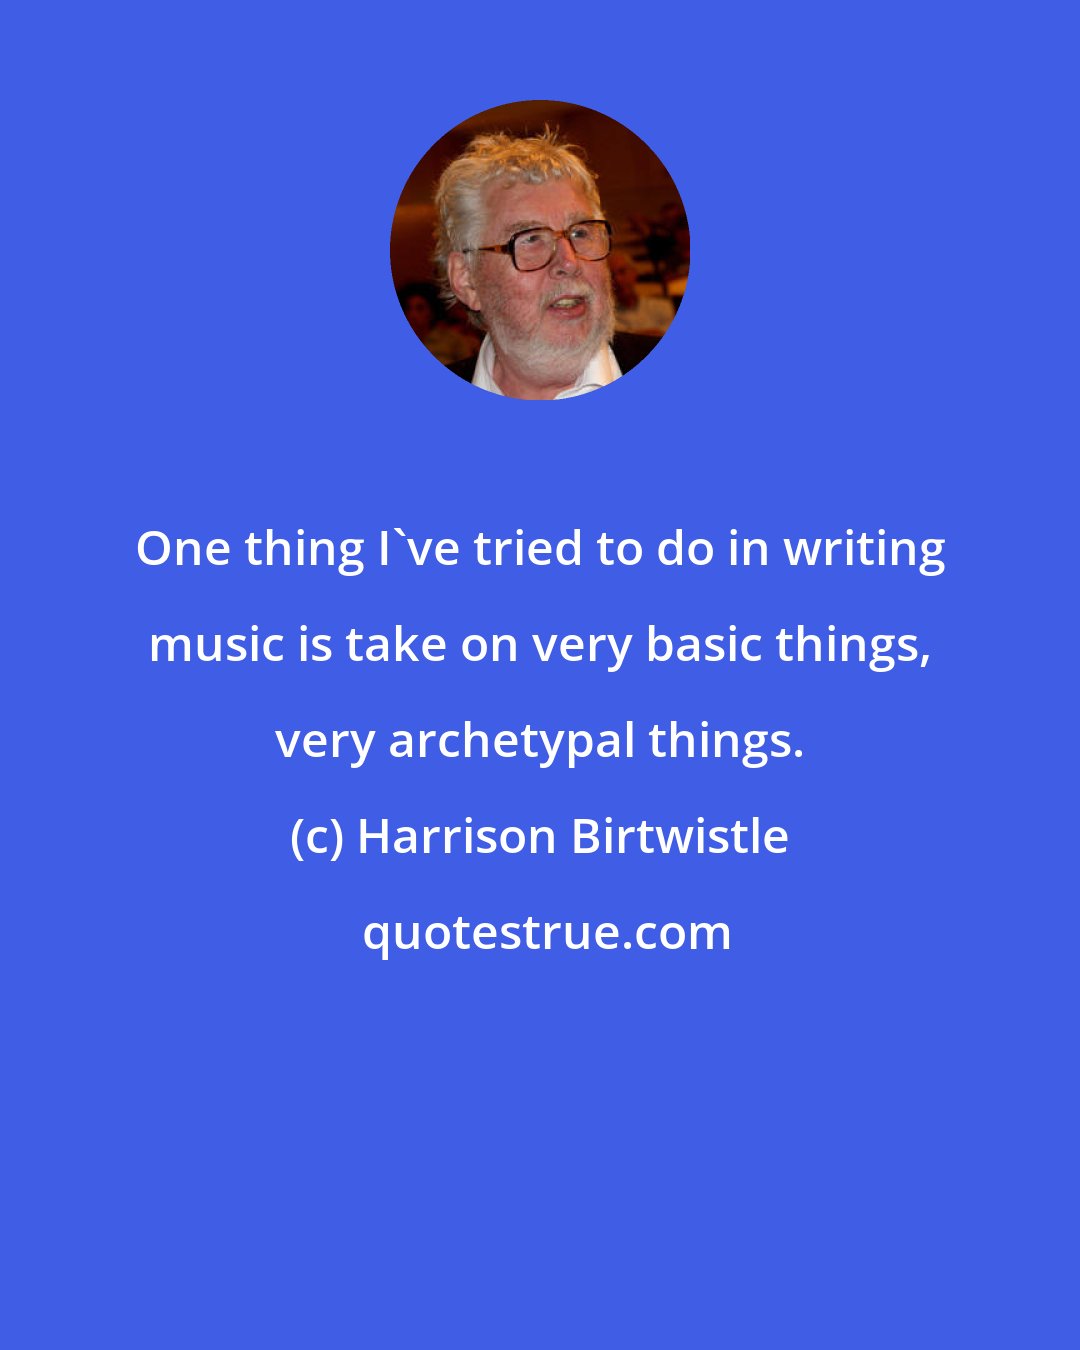 Harrison Birtwistle: One thing I've tried to do in writing music is take on very basic things, very archetypal things.